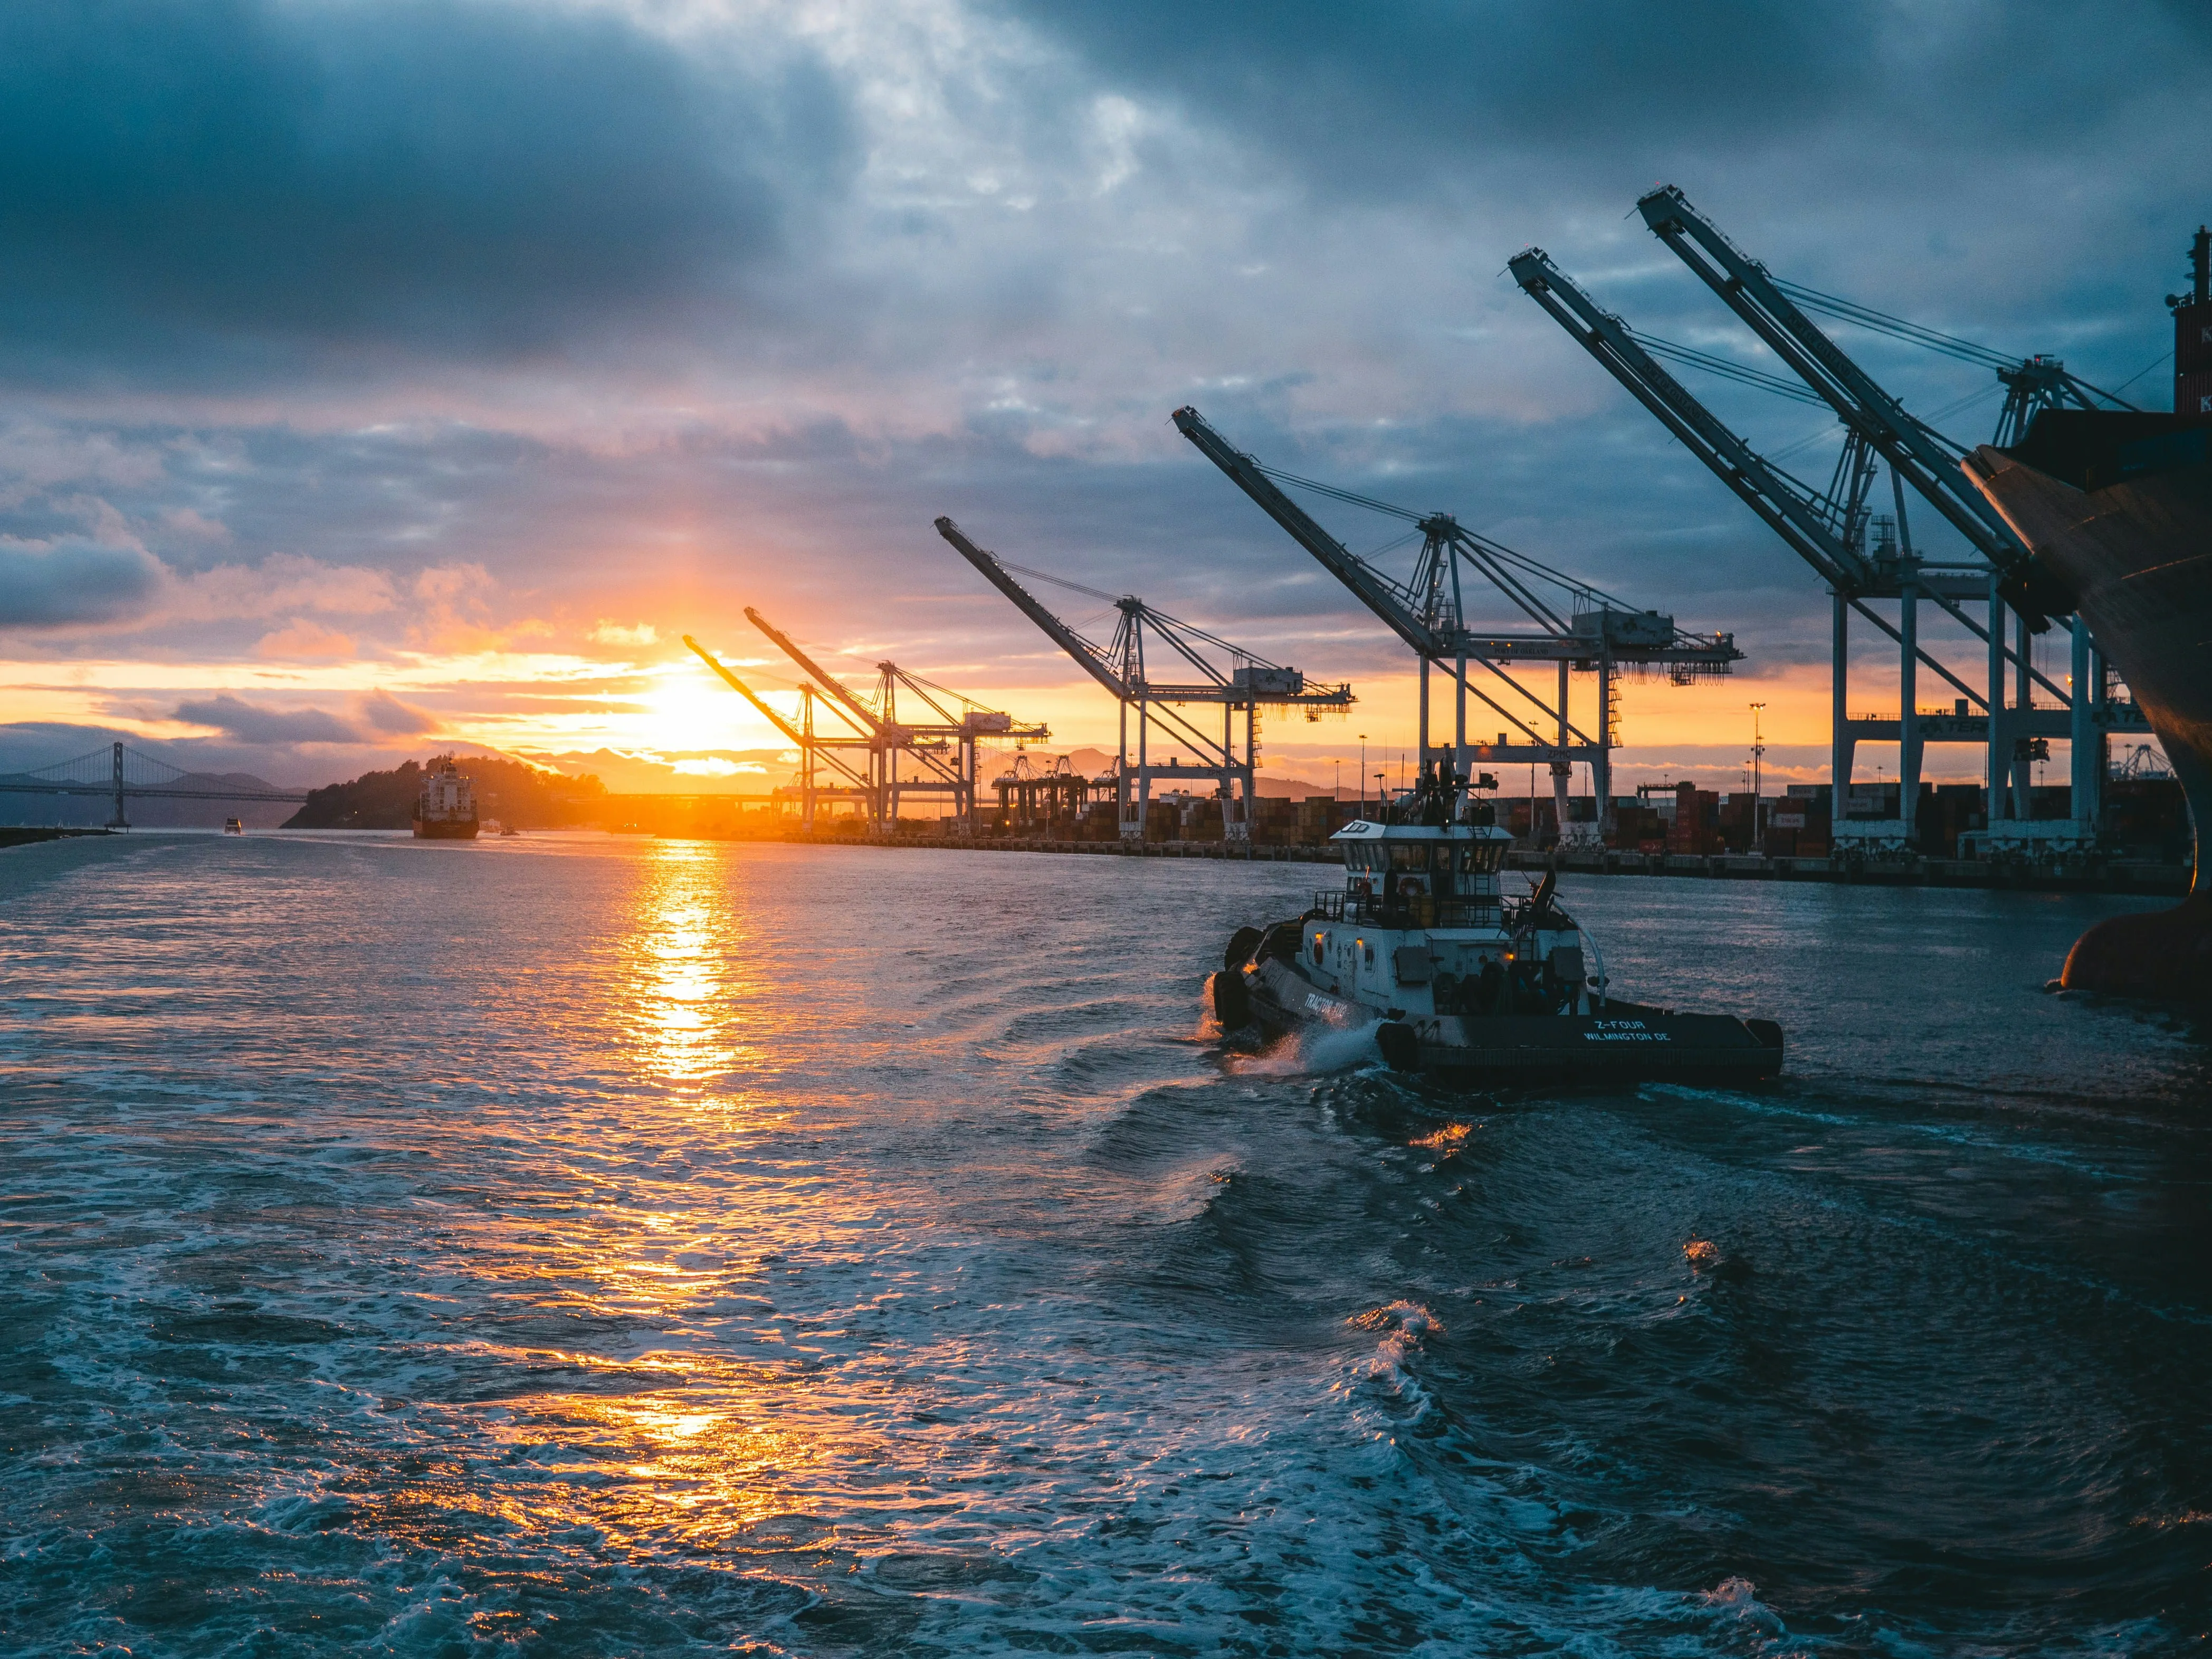 View of a boat at a port during sunset